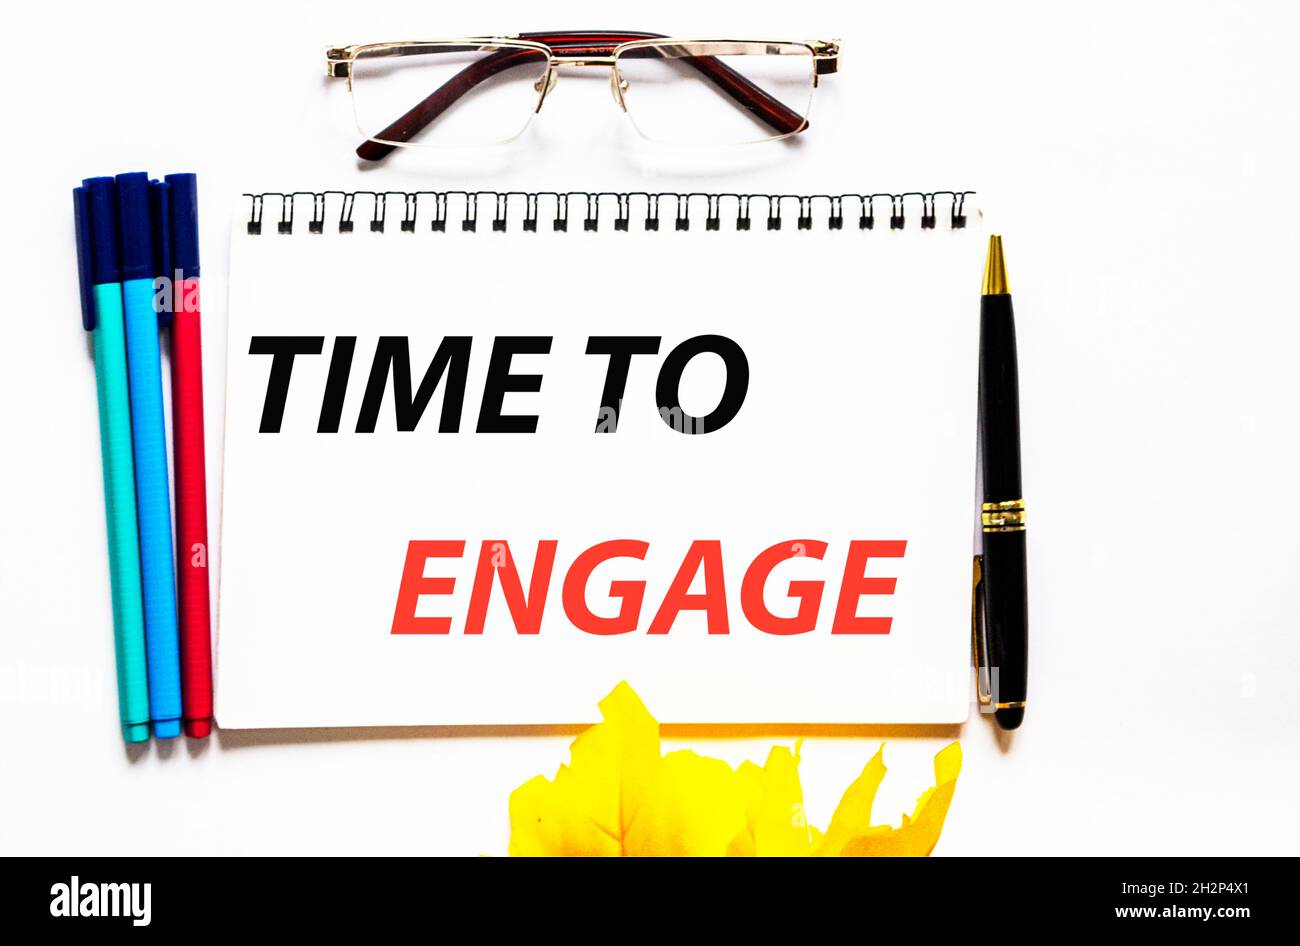 Time to engage, the text is written on a notebook, next to glasses, a pen and felt-tip pens on a white background. Stock Photo